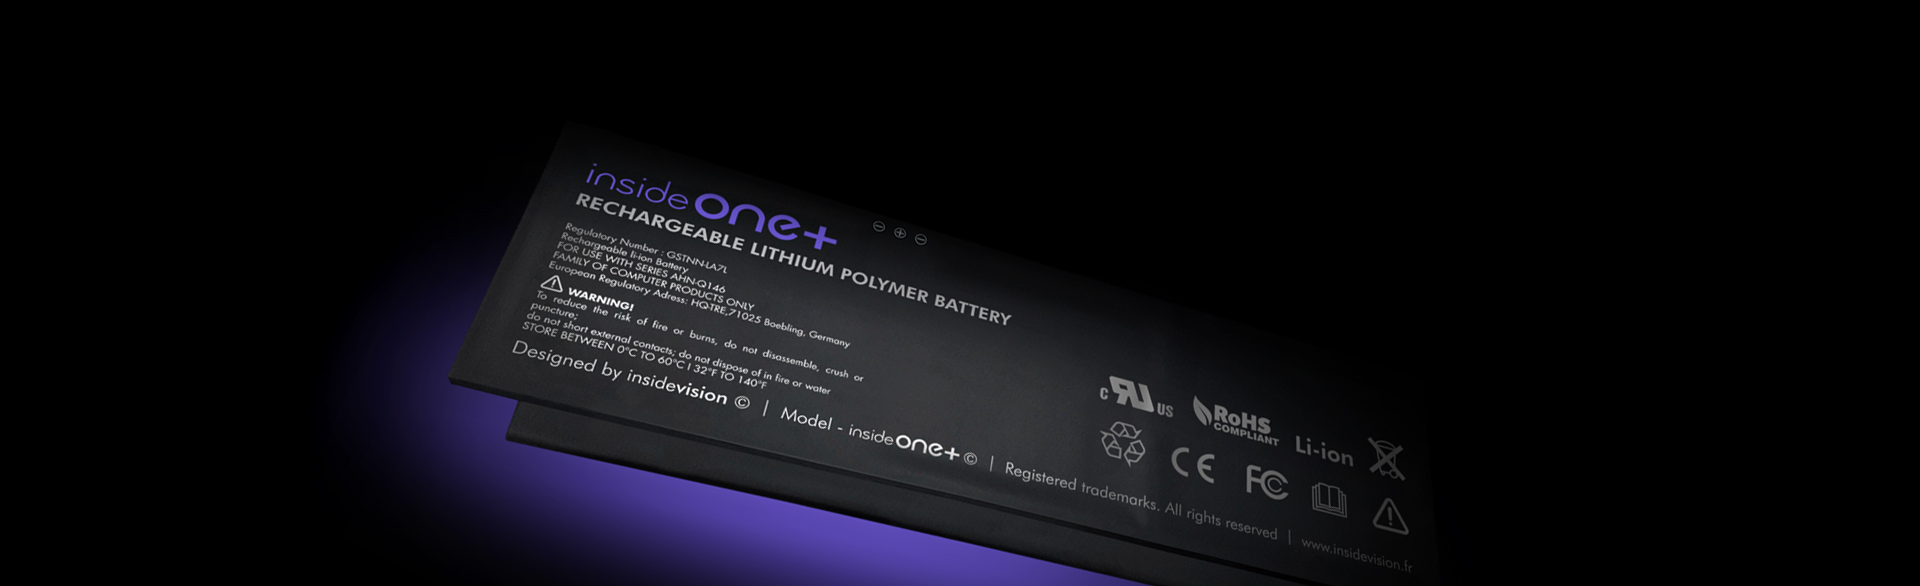 The image shows the insideONE+ battery.